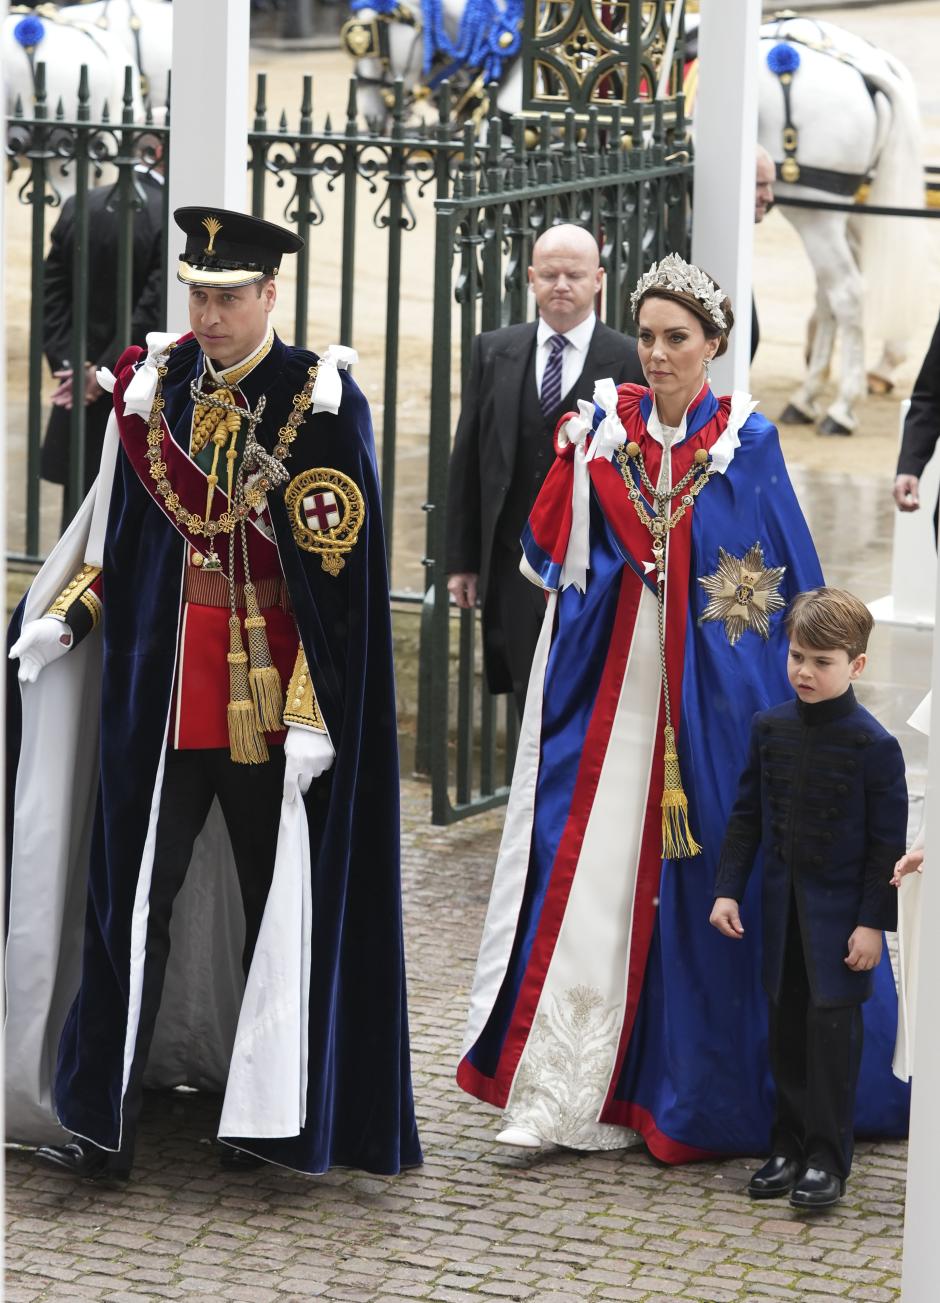 Prince William of Wales and Kate Middleton Princess of Wales with Prince Louis attending Britain's King Charles III coronation ceremony in London, Britain May 6, 2023